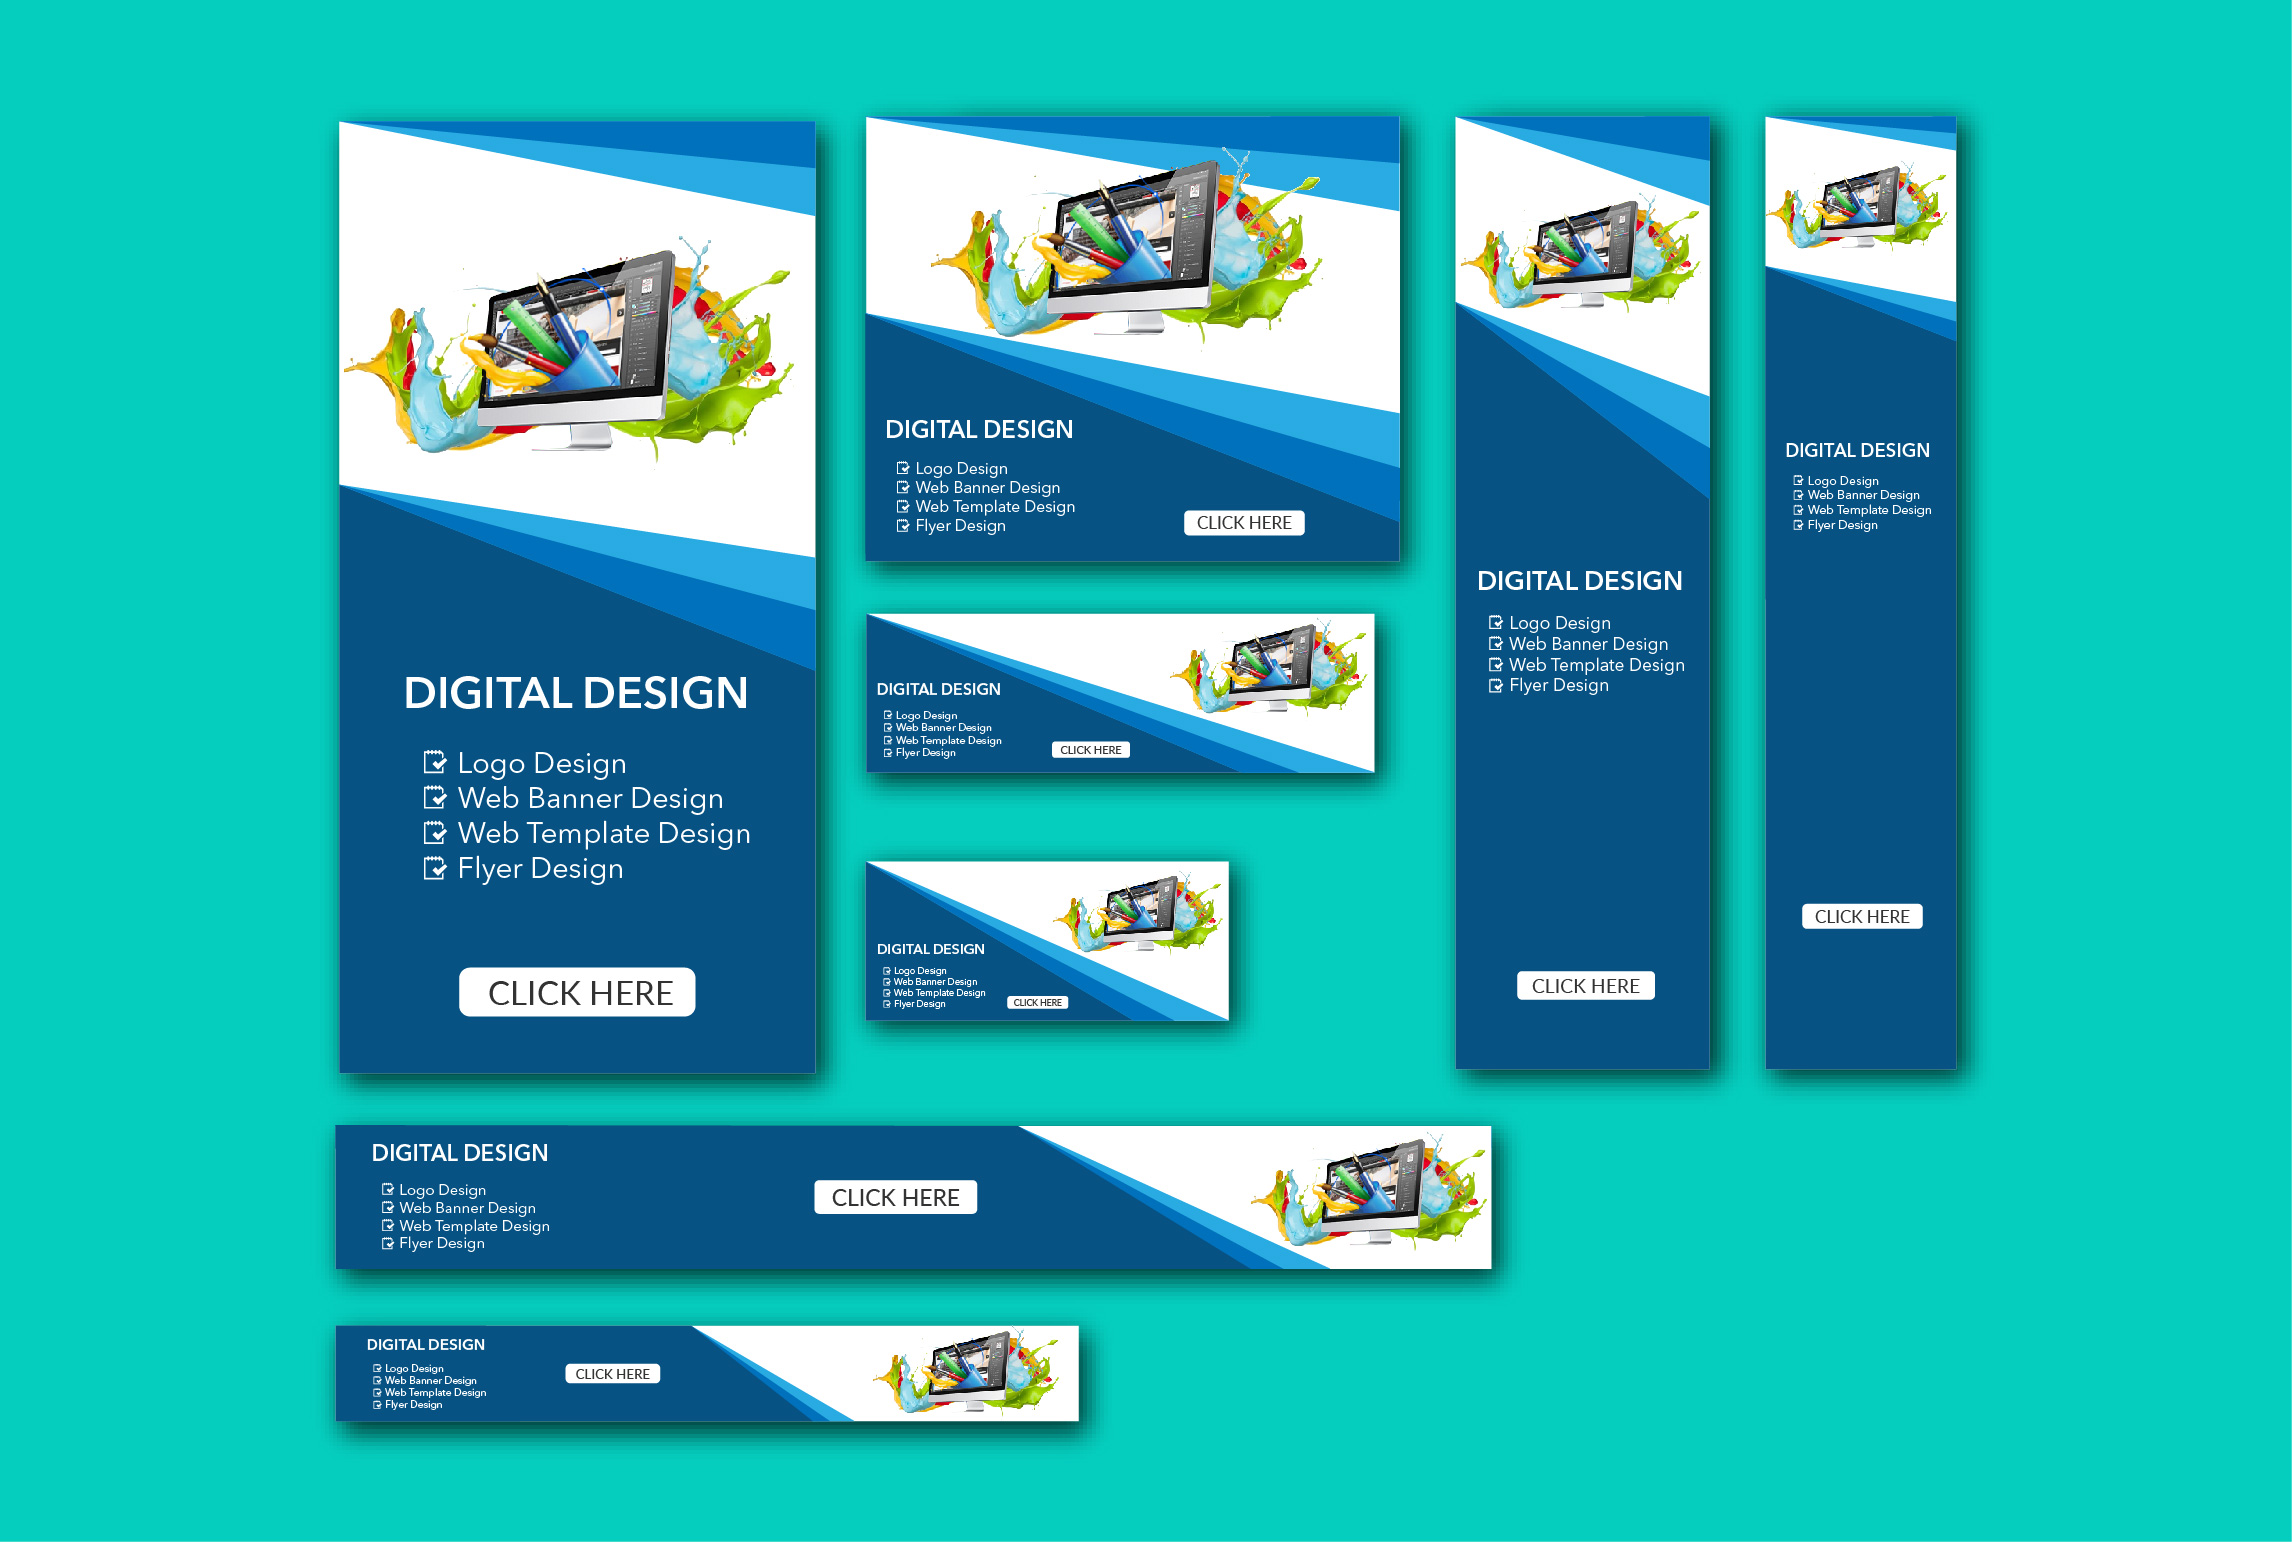 I will design HTML5 animated banner ads that get more sales for $4